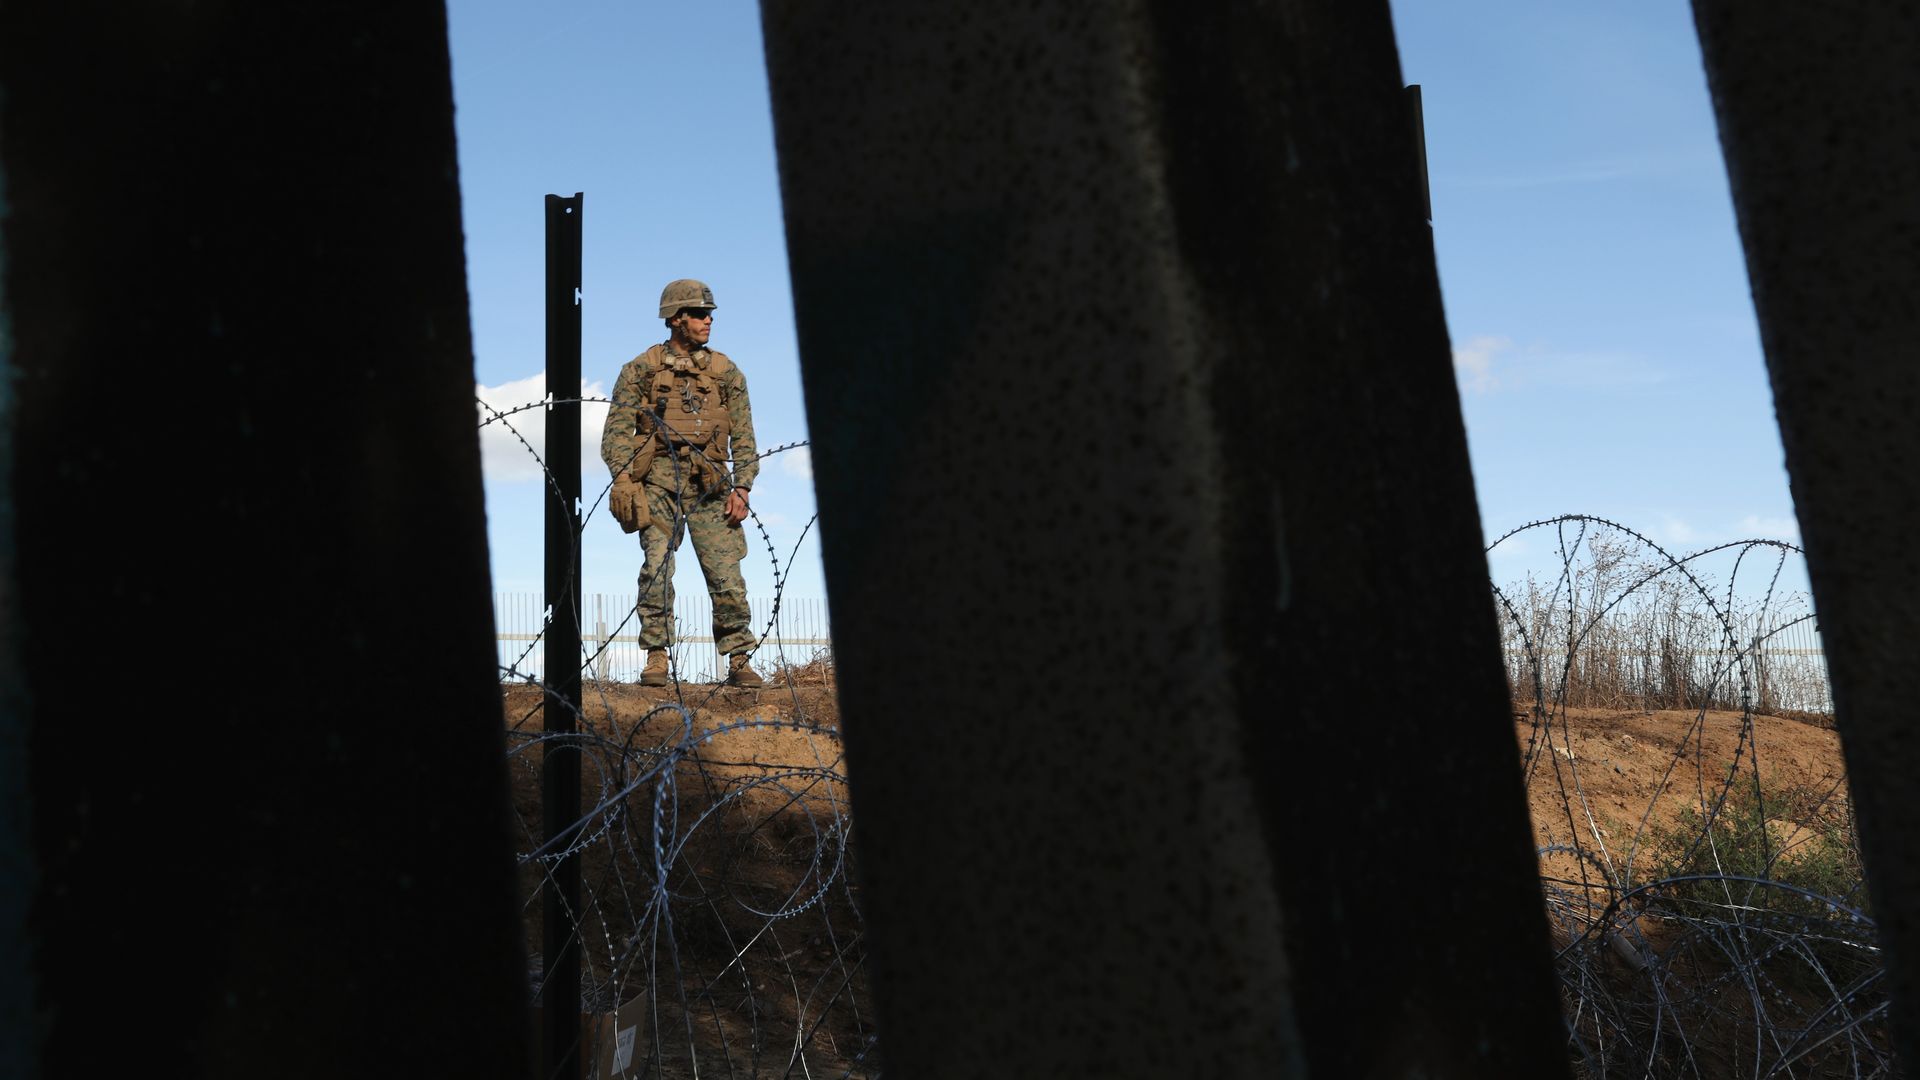 In this image, a Marine is seen in the distance between two fence poles that are close up against the camera. The clear sky is behind the Marine, who is in full uniform.